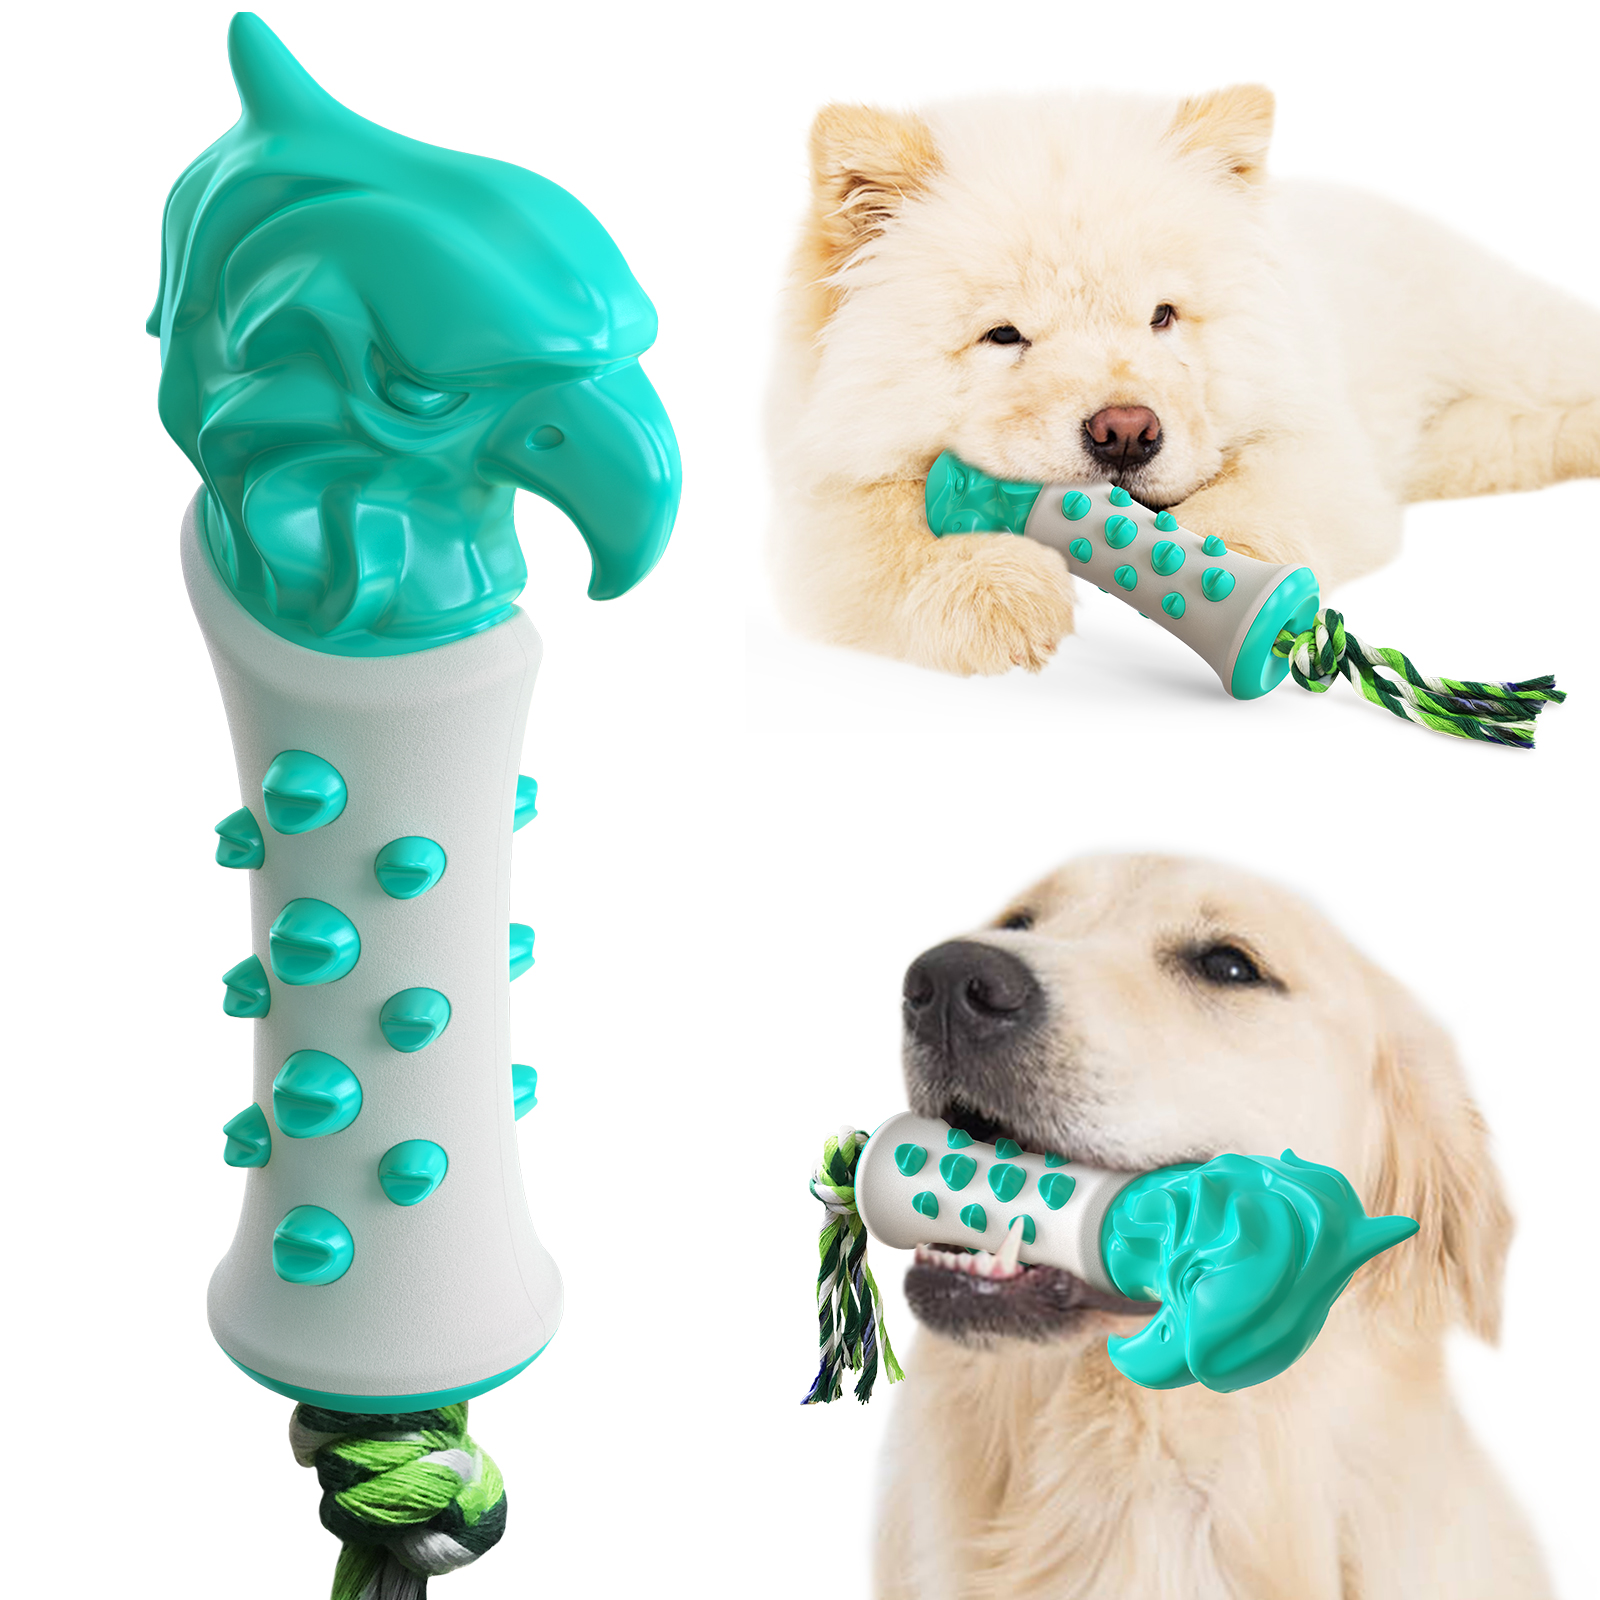 Pet Supplies Factory New Explosive Amazon Bite Resistant Tooth Cleaning Dog Toothbrush Molar Stick Scepter Dog Toys